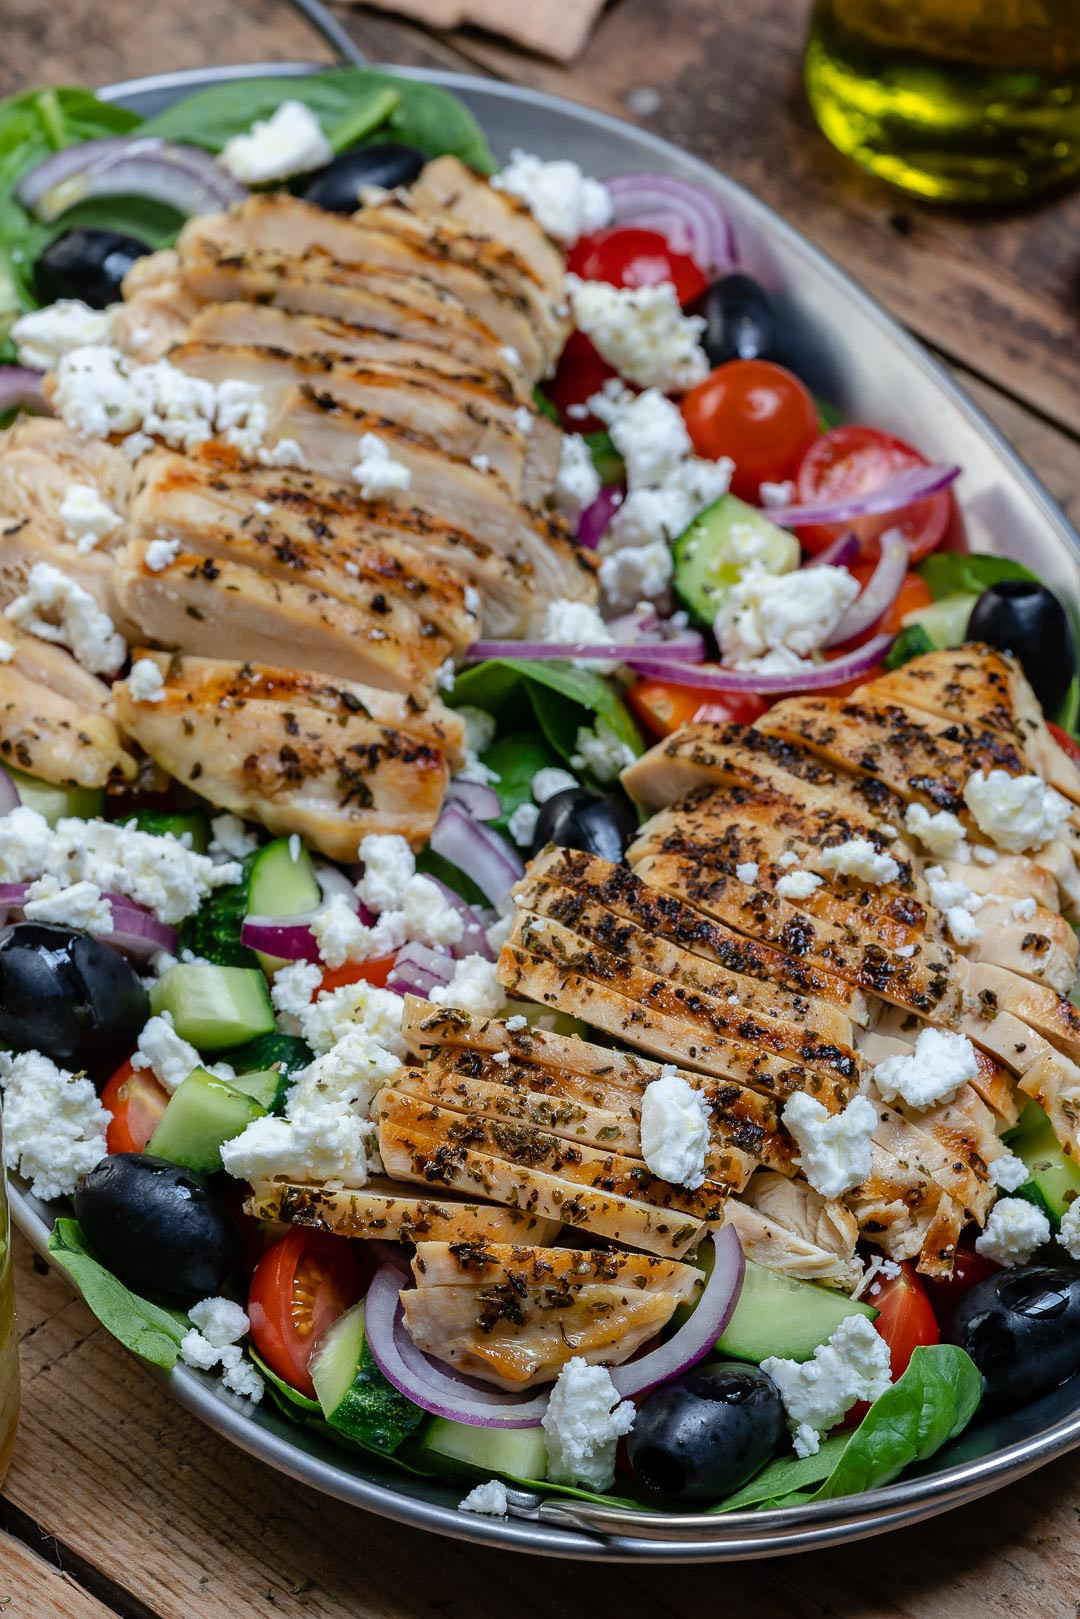 Healthy Grilled Chicken Salad Recipe Lovely Healthy Grilled Chicken Salad Recipe Greek Style